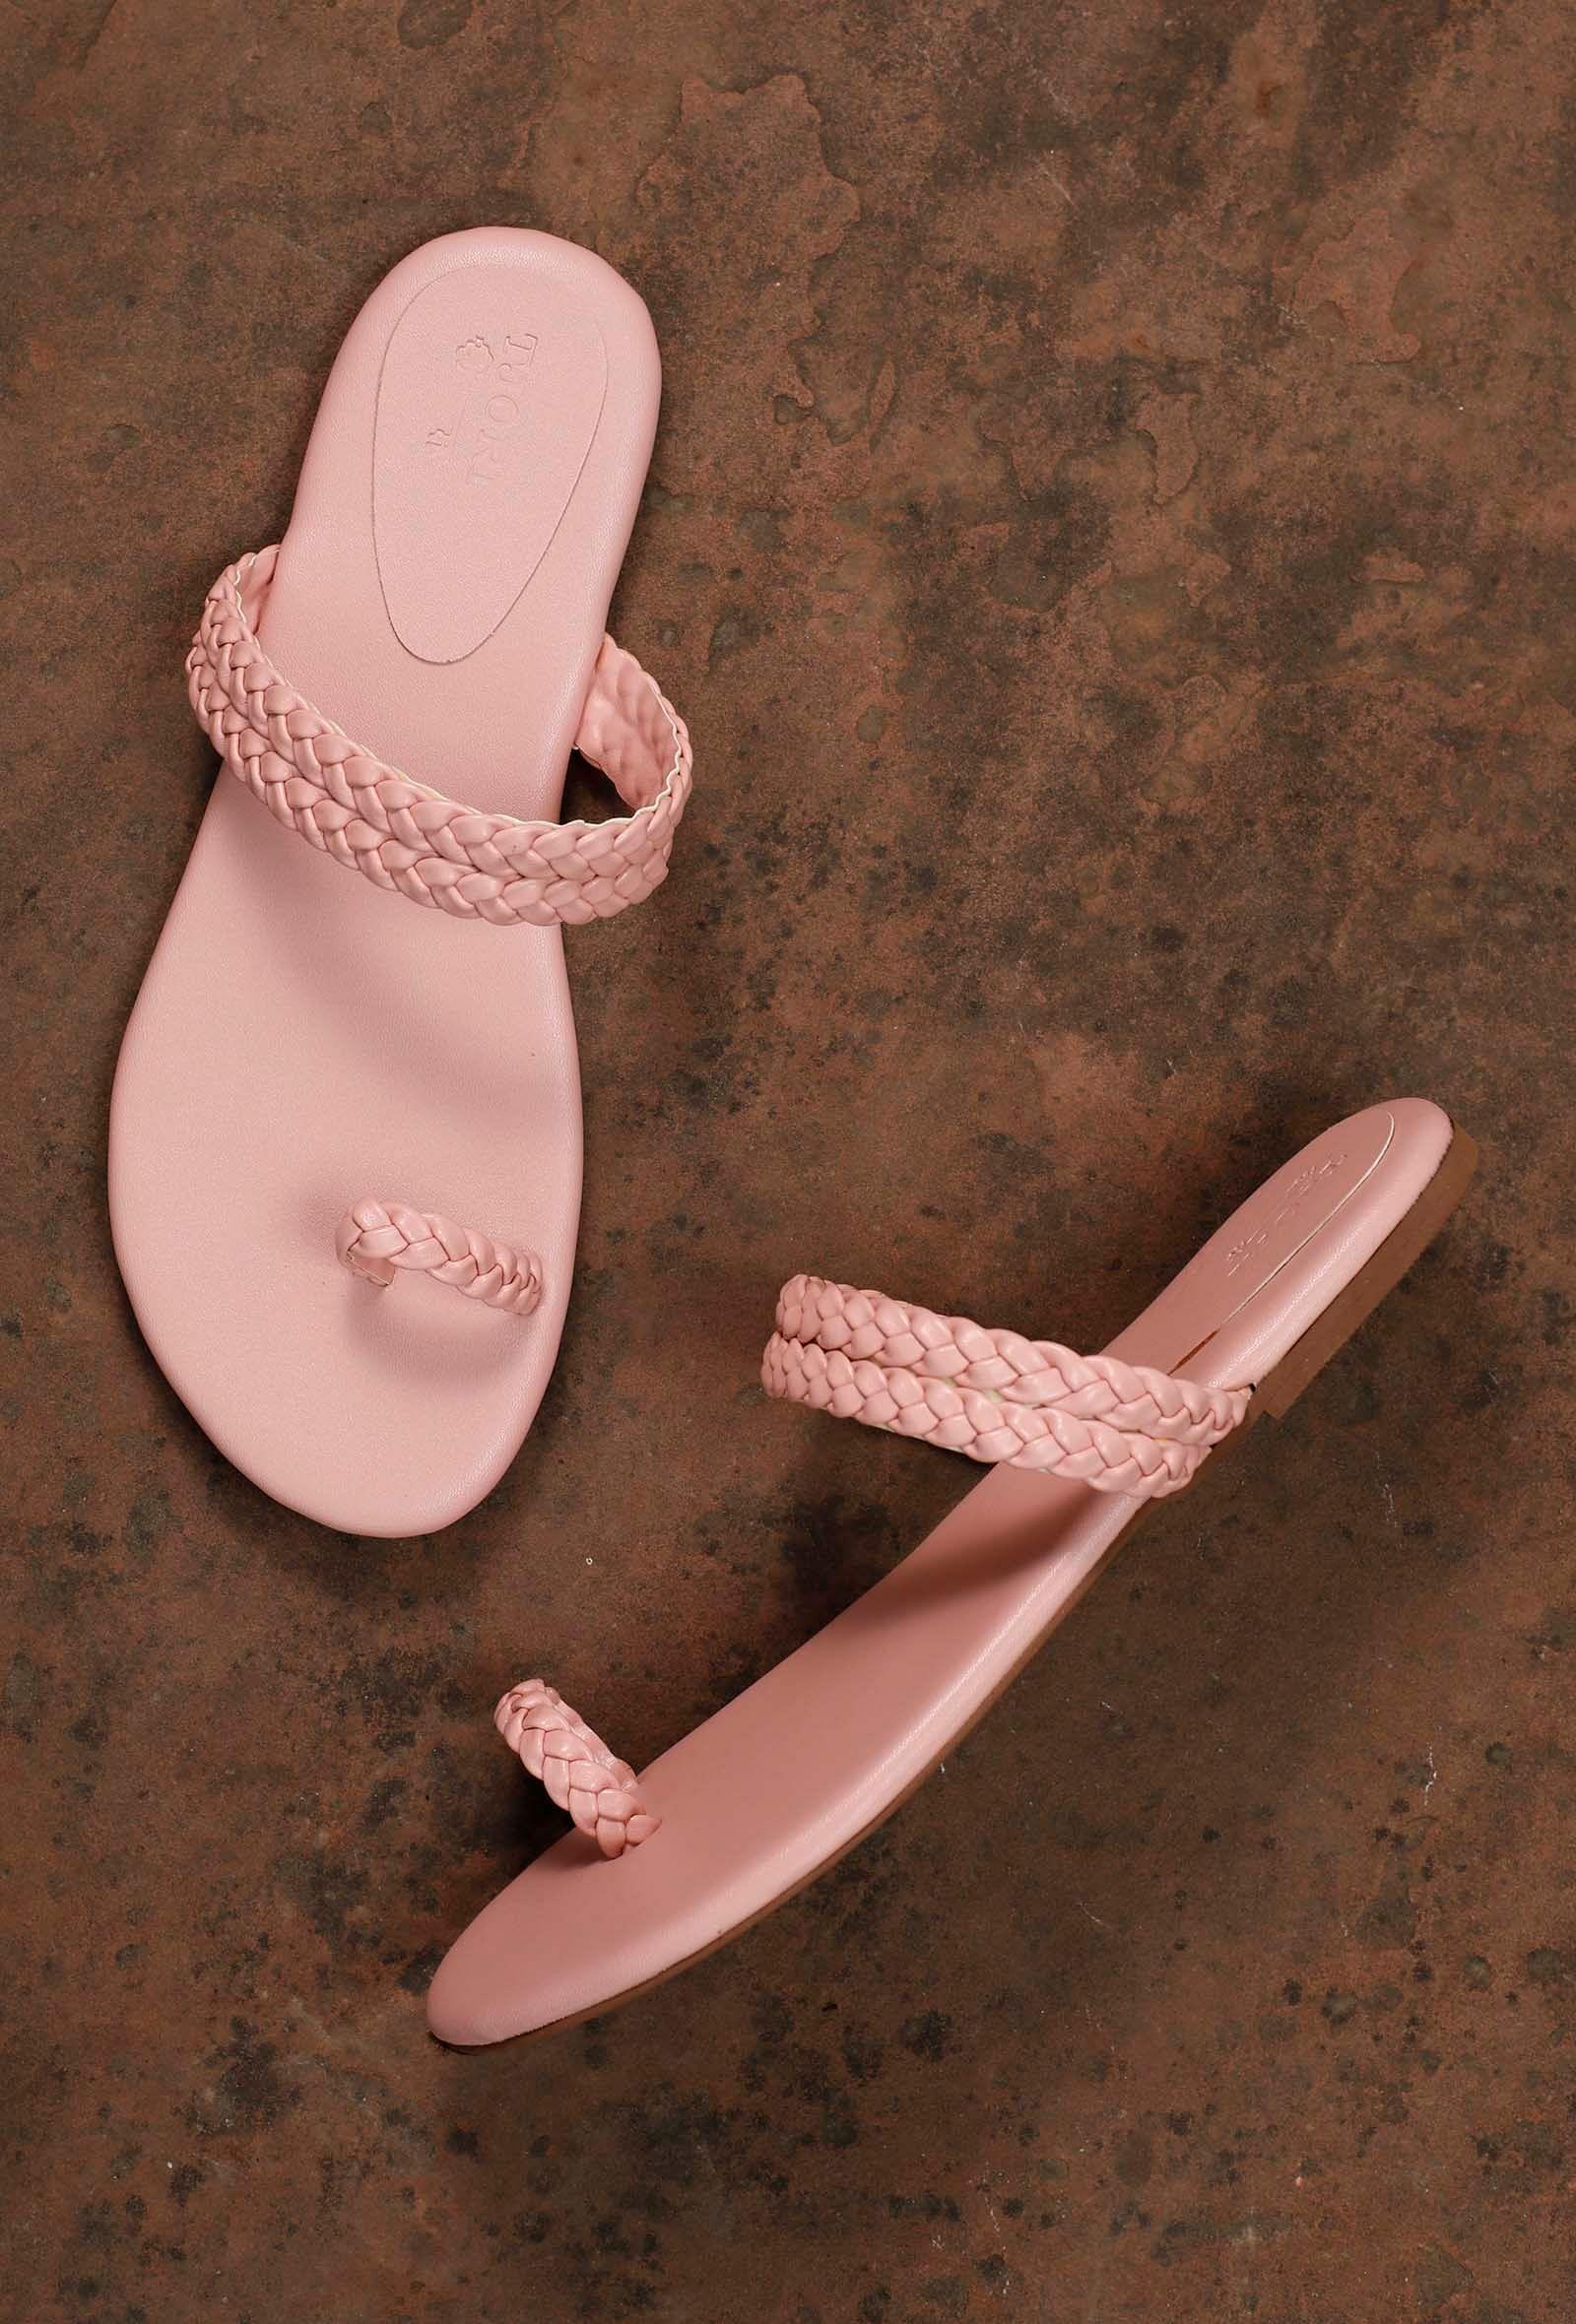 rose-pink-knotted-cruelty-free-leather-sandals